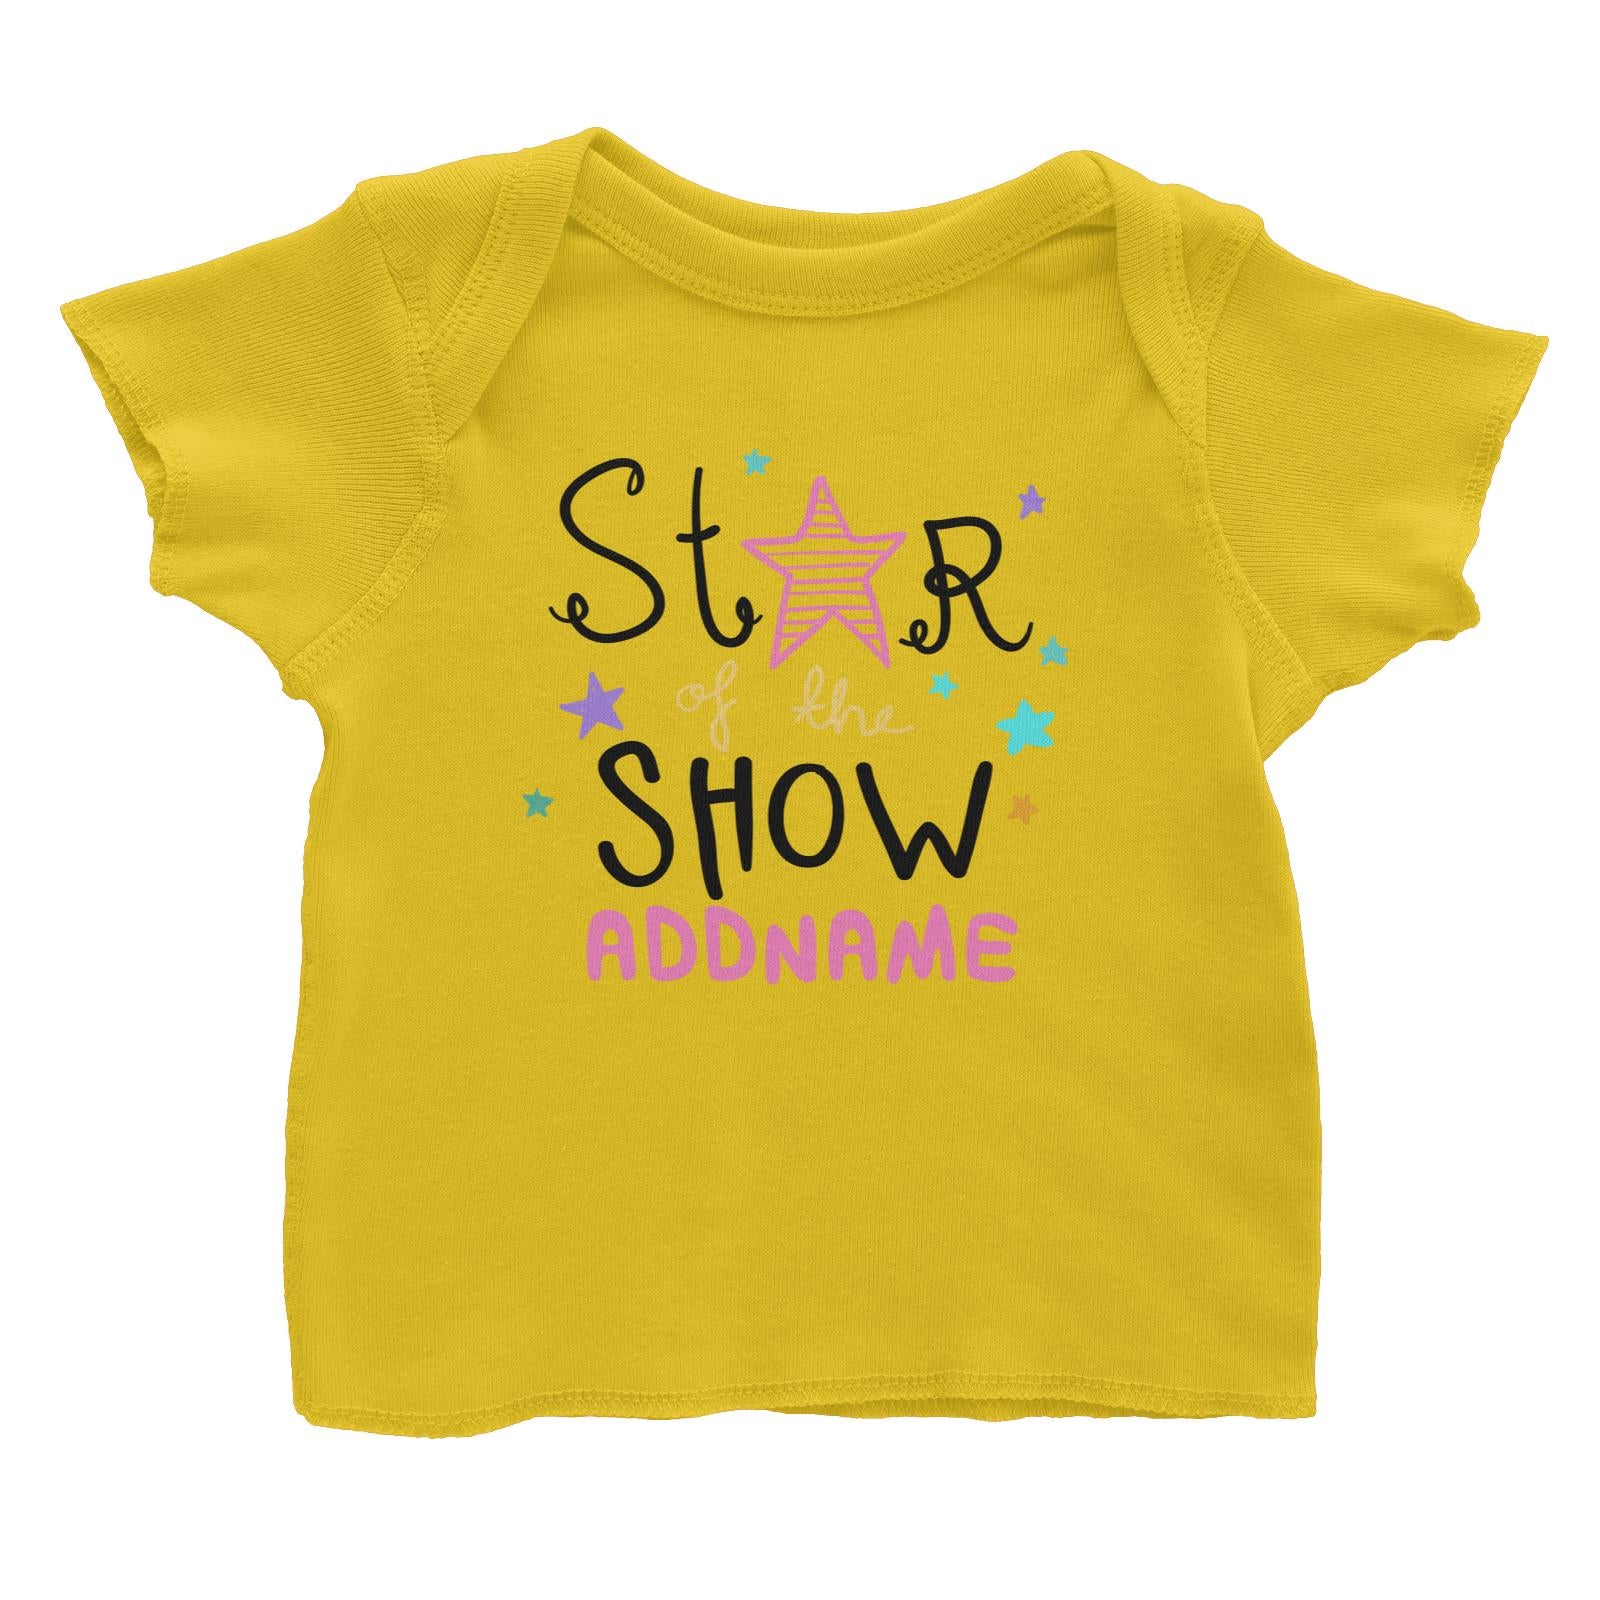 Children's Day Gift Series Star Of The Show Pink Addname Baby T-Shirt